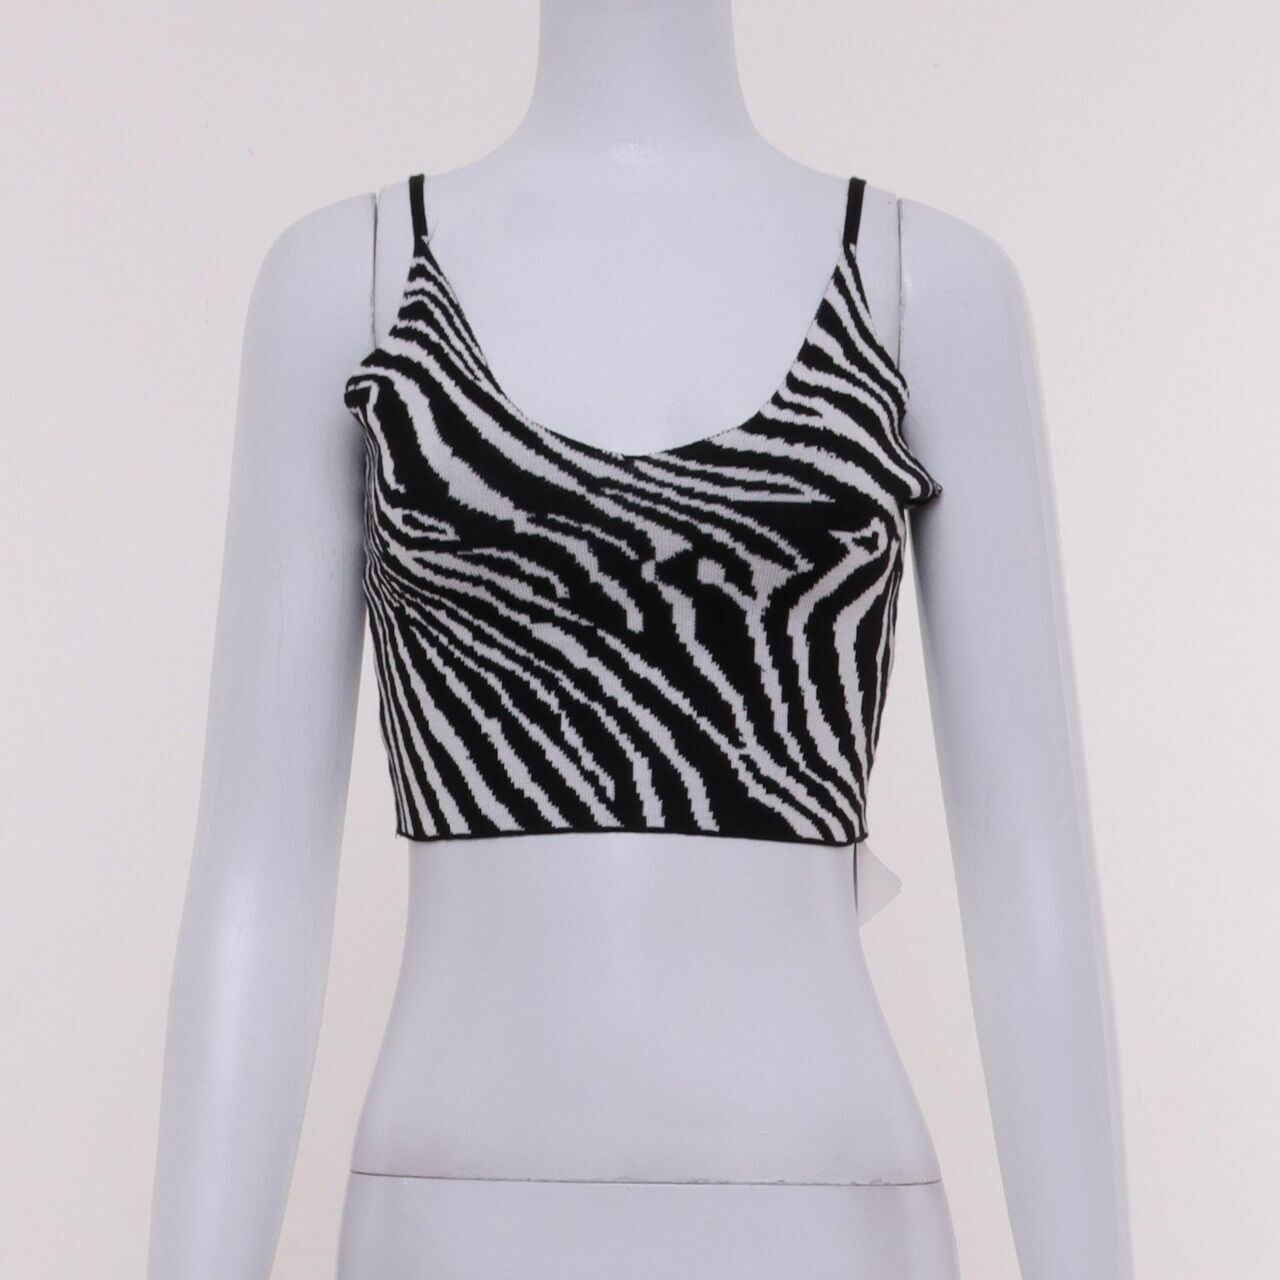 Private Collection Black & White Animal Print Crop Top Sleeveless